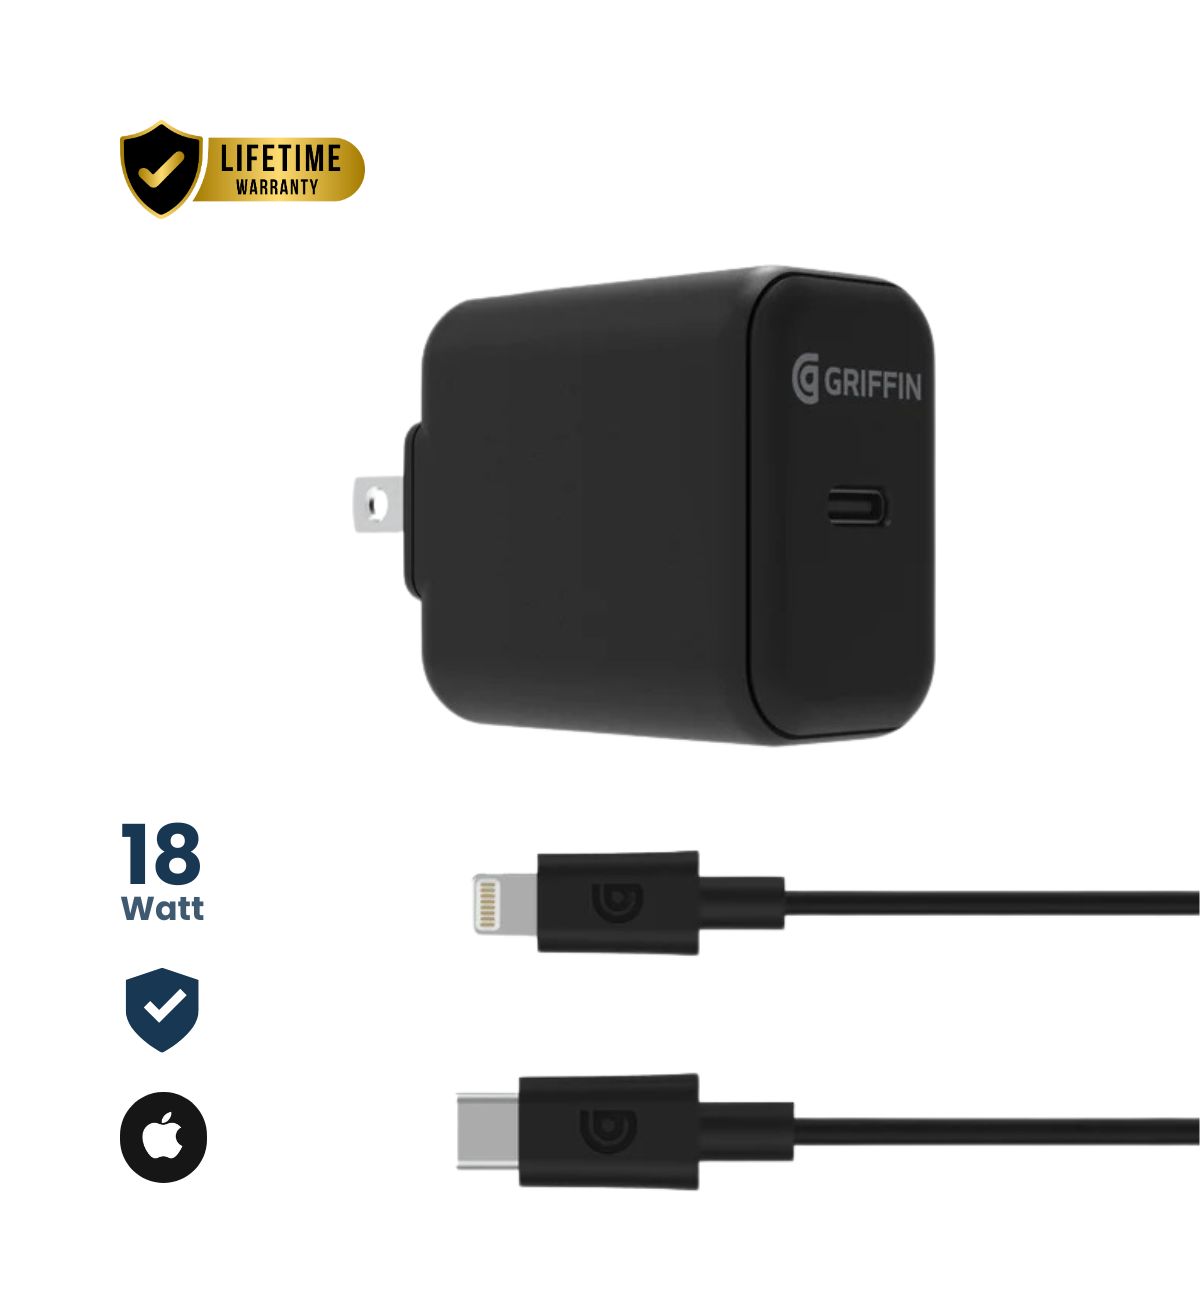 Grifin USB C to Lightning adapter with MFi certification for safe and reliable iPhone charging (UK).